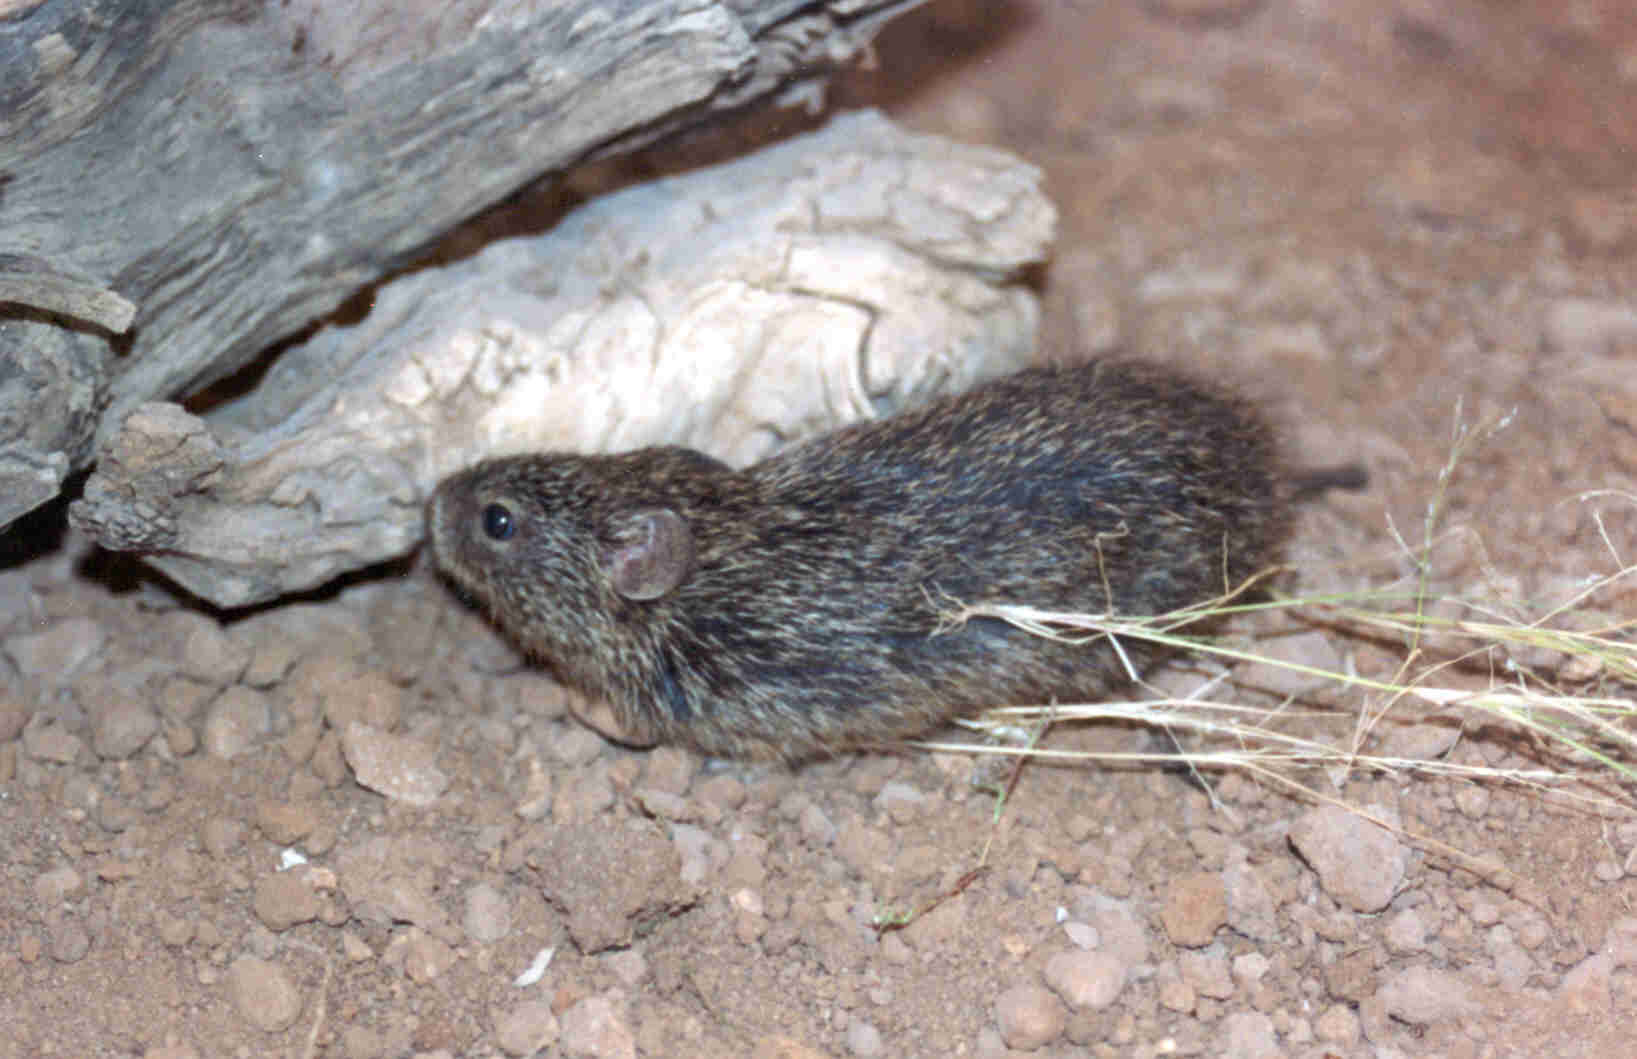 Image of tawny-bellied cotton rat